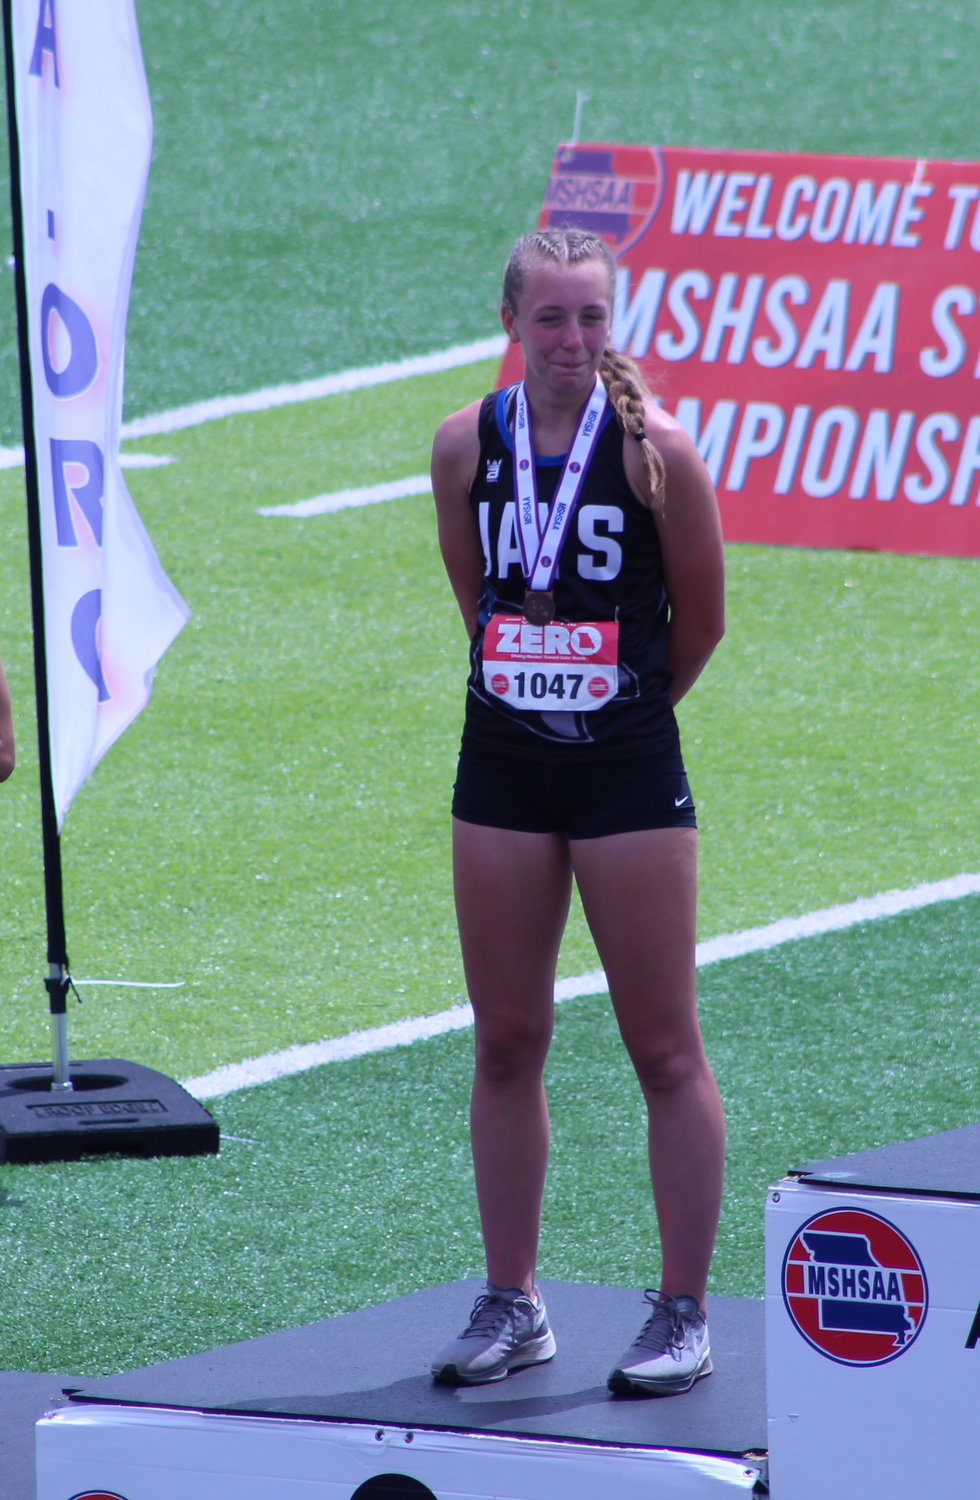 Abby McBride earned 3rd in Triple Jump with a leap of 36’3’’at the MSHSAA Class 4 Track and Field Championship. A personal best for McBride.